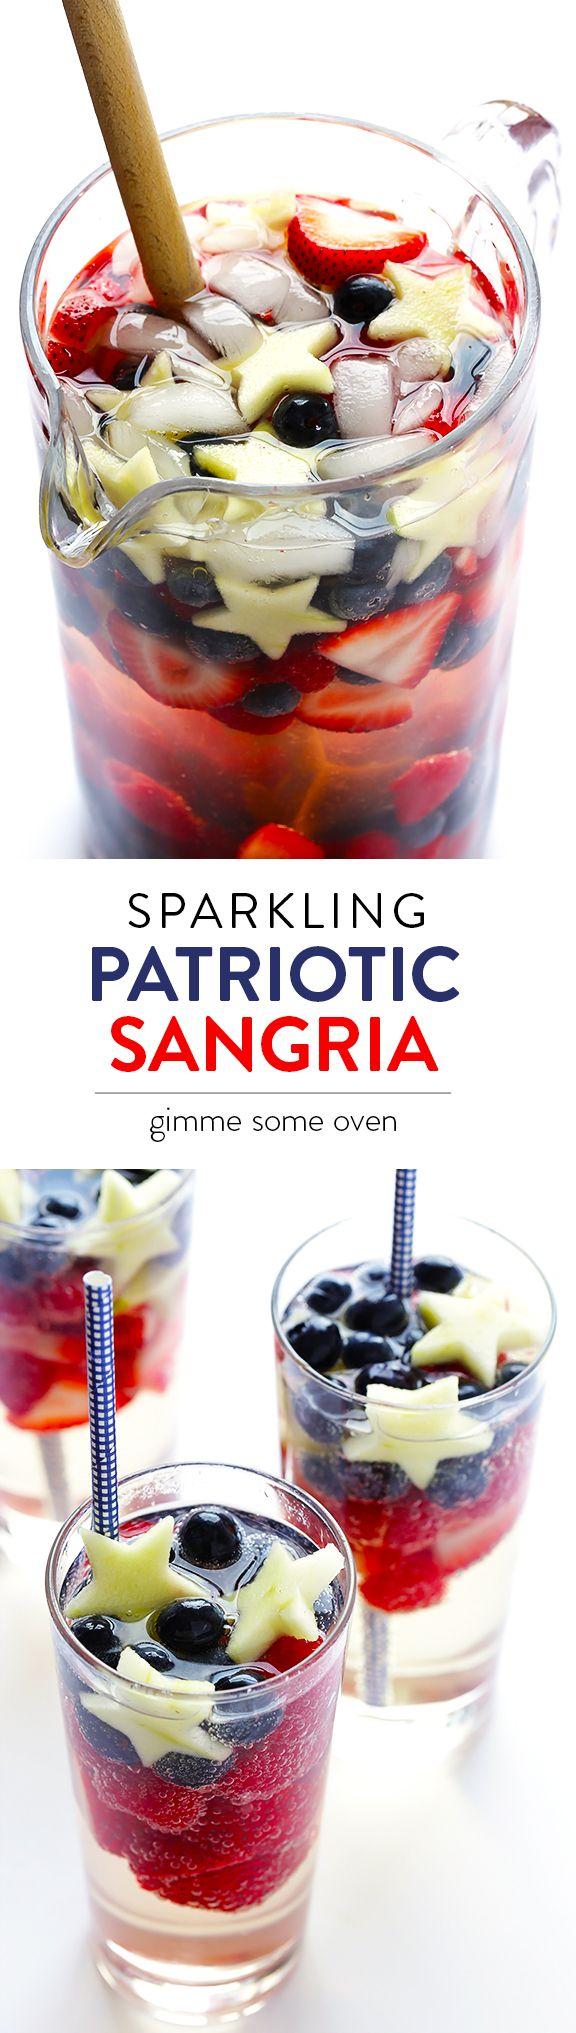 Wedding - Sparkling Red, White And Blue Sangria